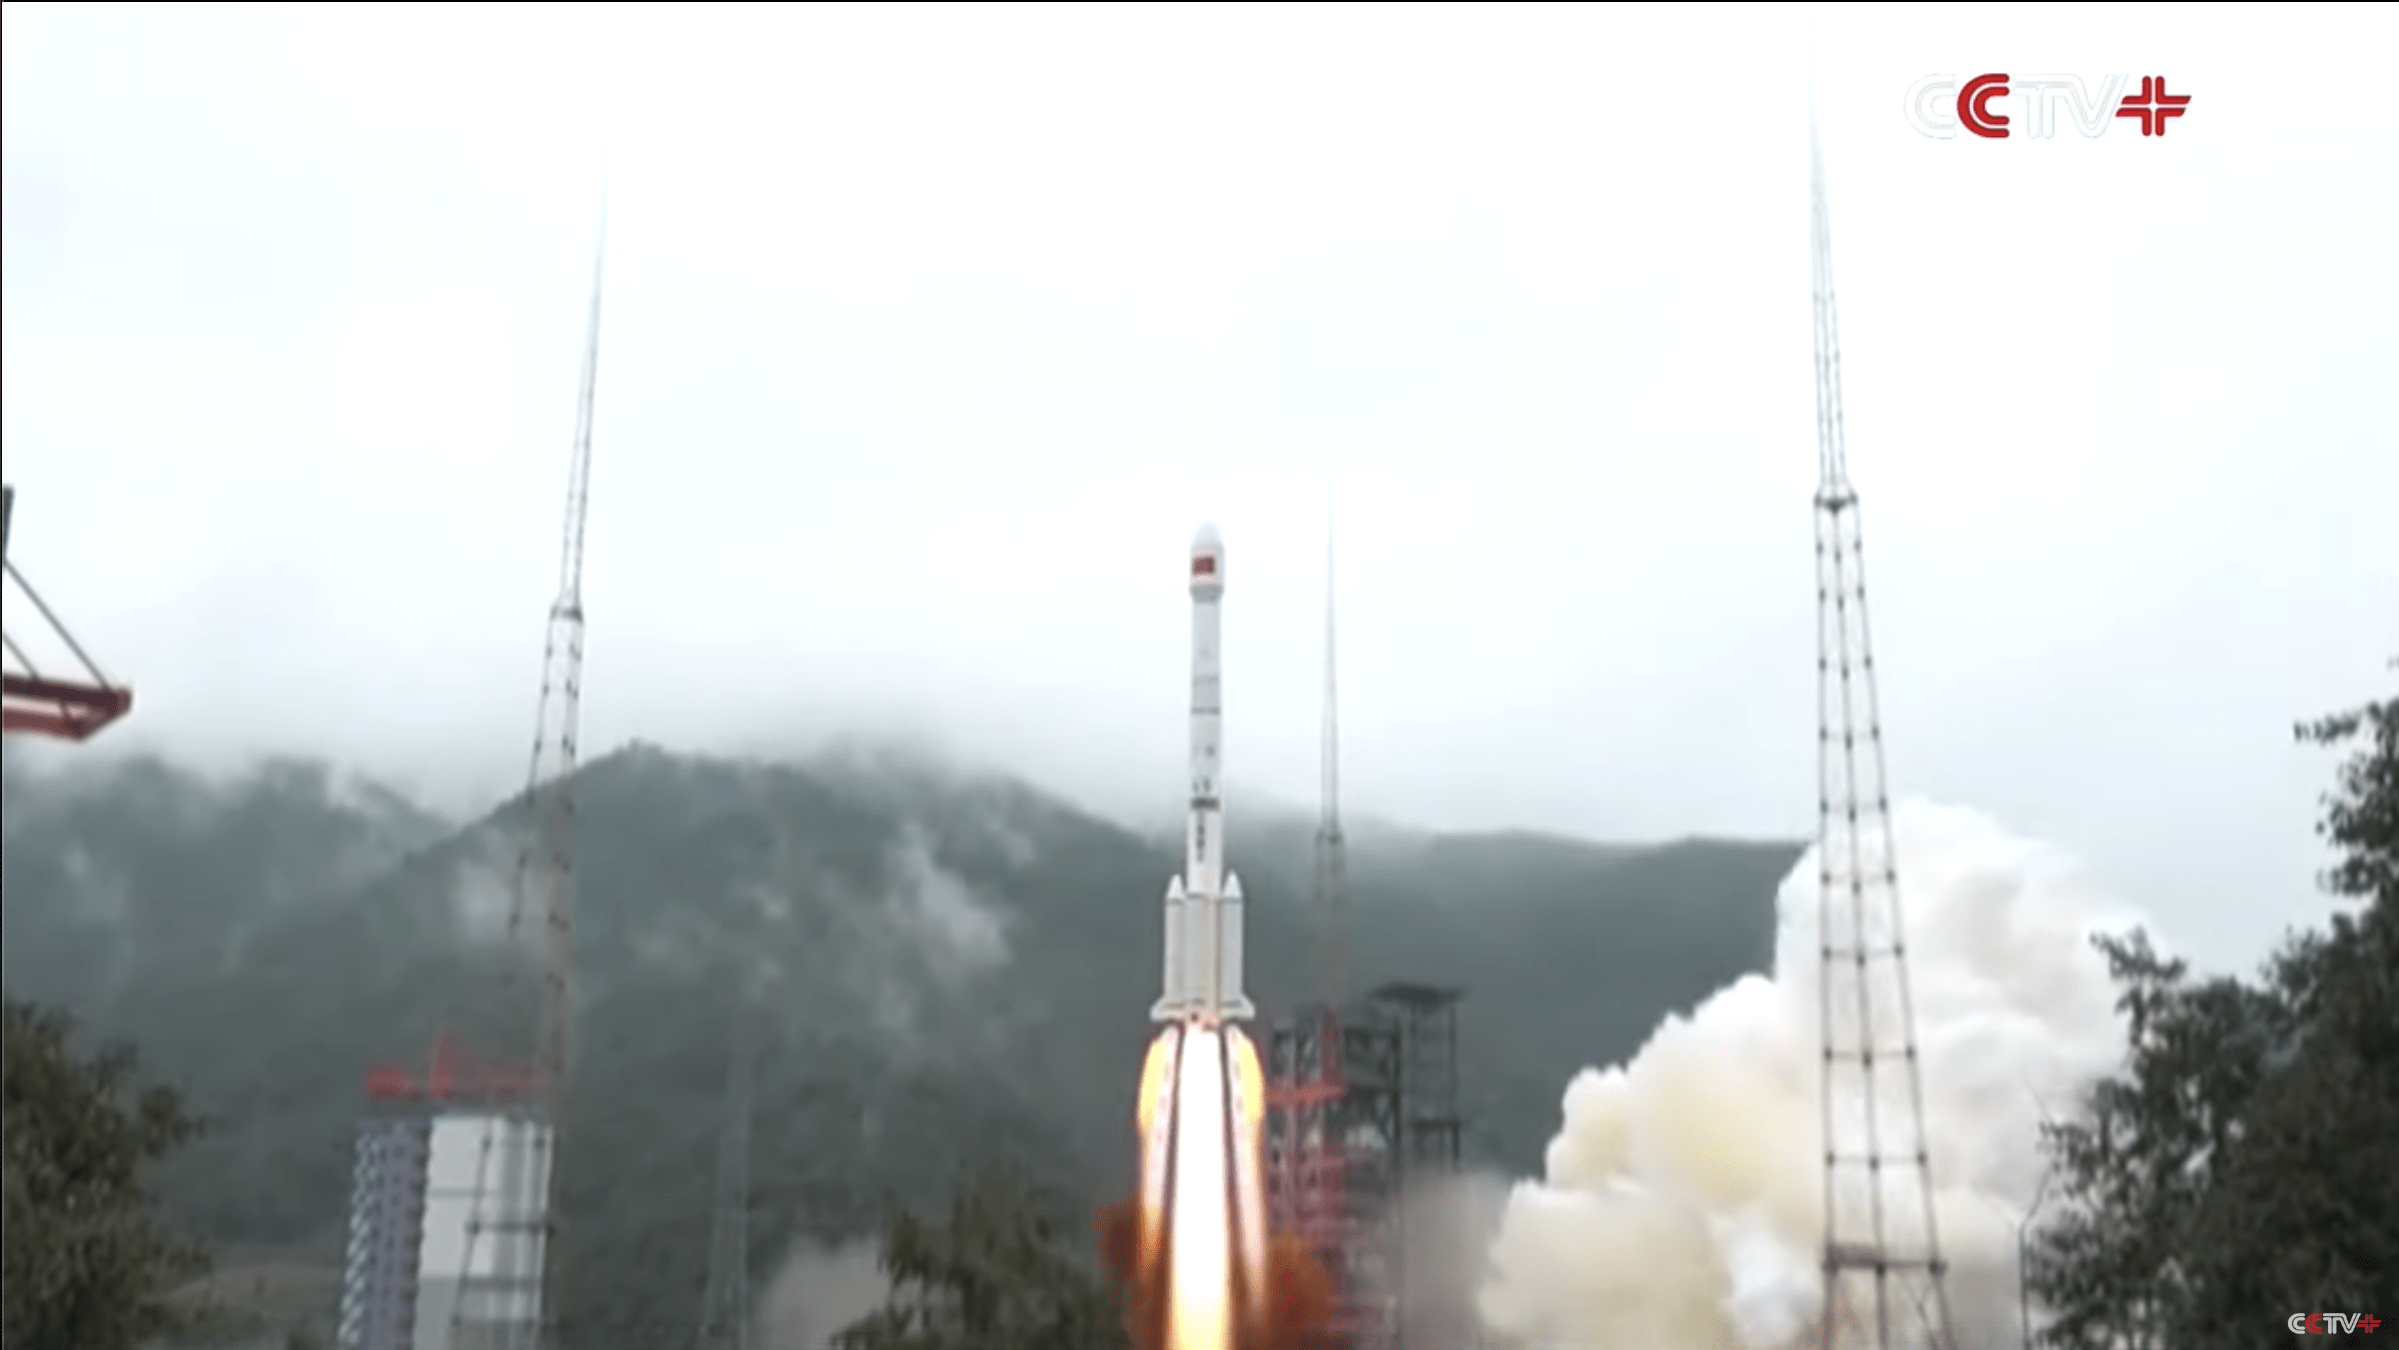 A Long March-3B rocket launching on October 23, 2021 from the Xichang Satellite Launch Centre. (Image: Screenshot: CCTV/YouTube)